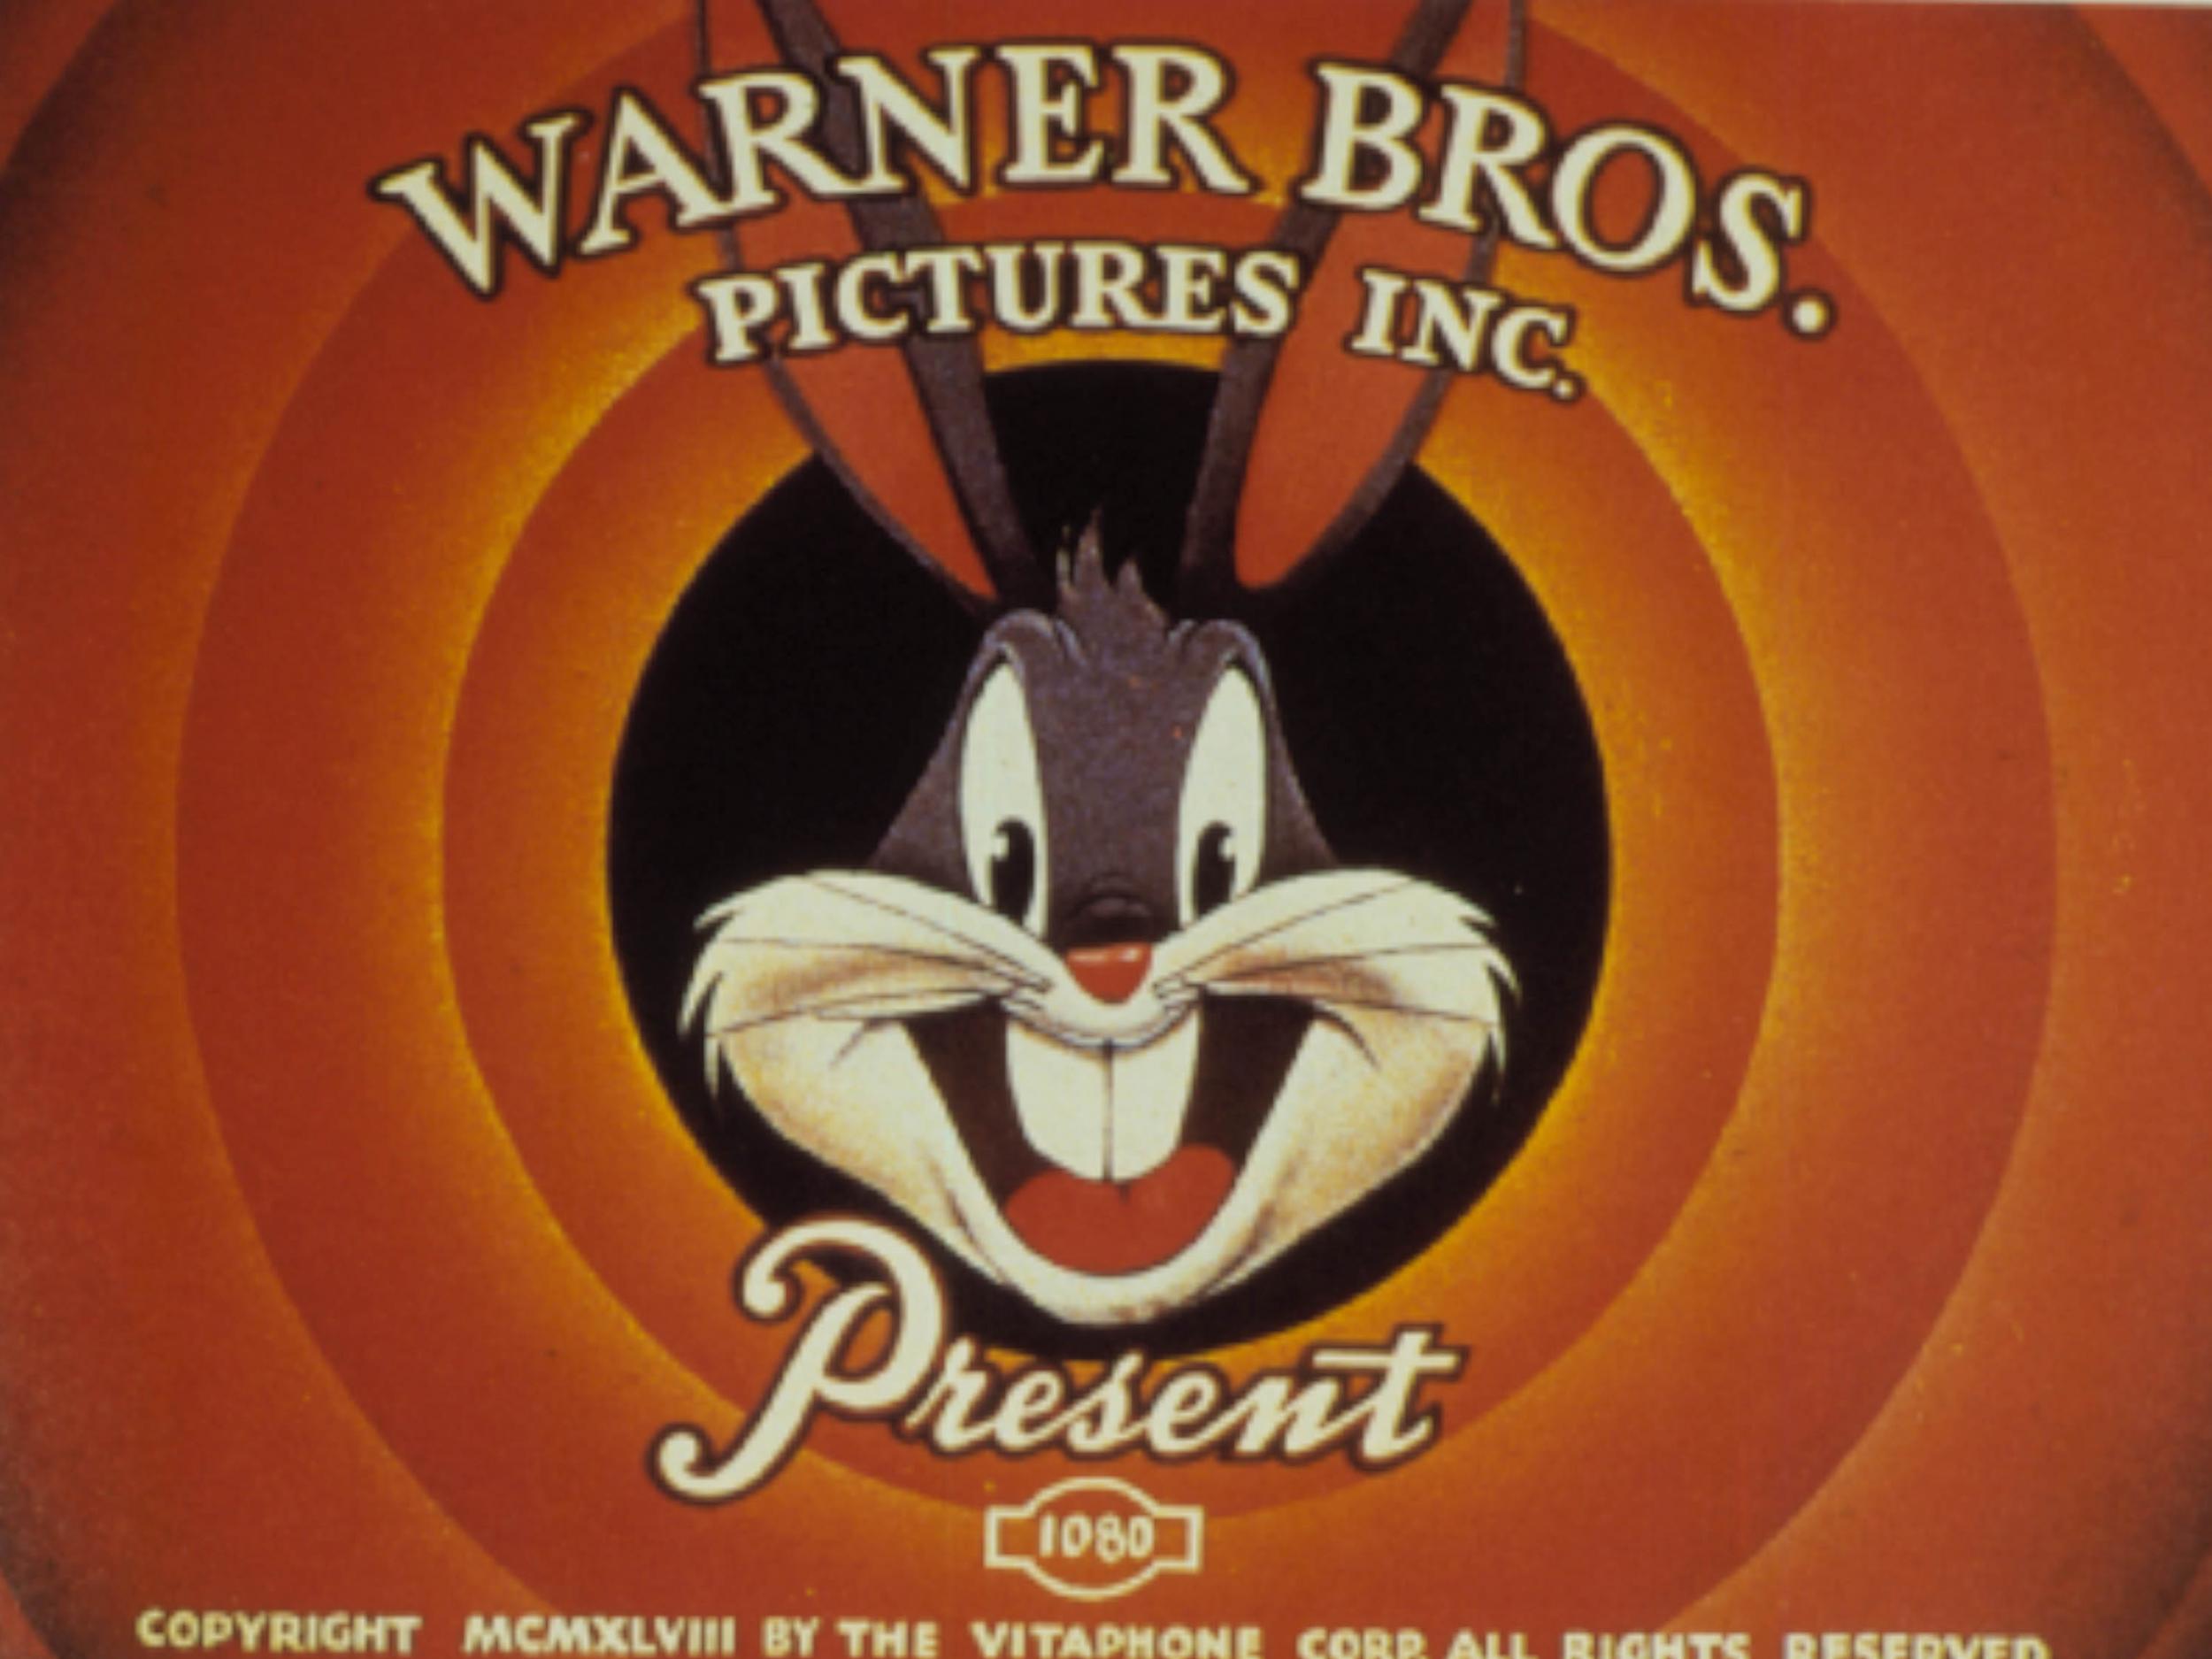 Bugs Bunny made his screen debut in Porky’s Hare Hunt